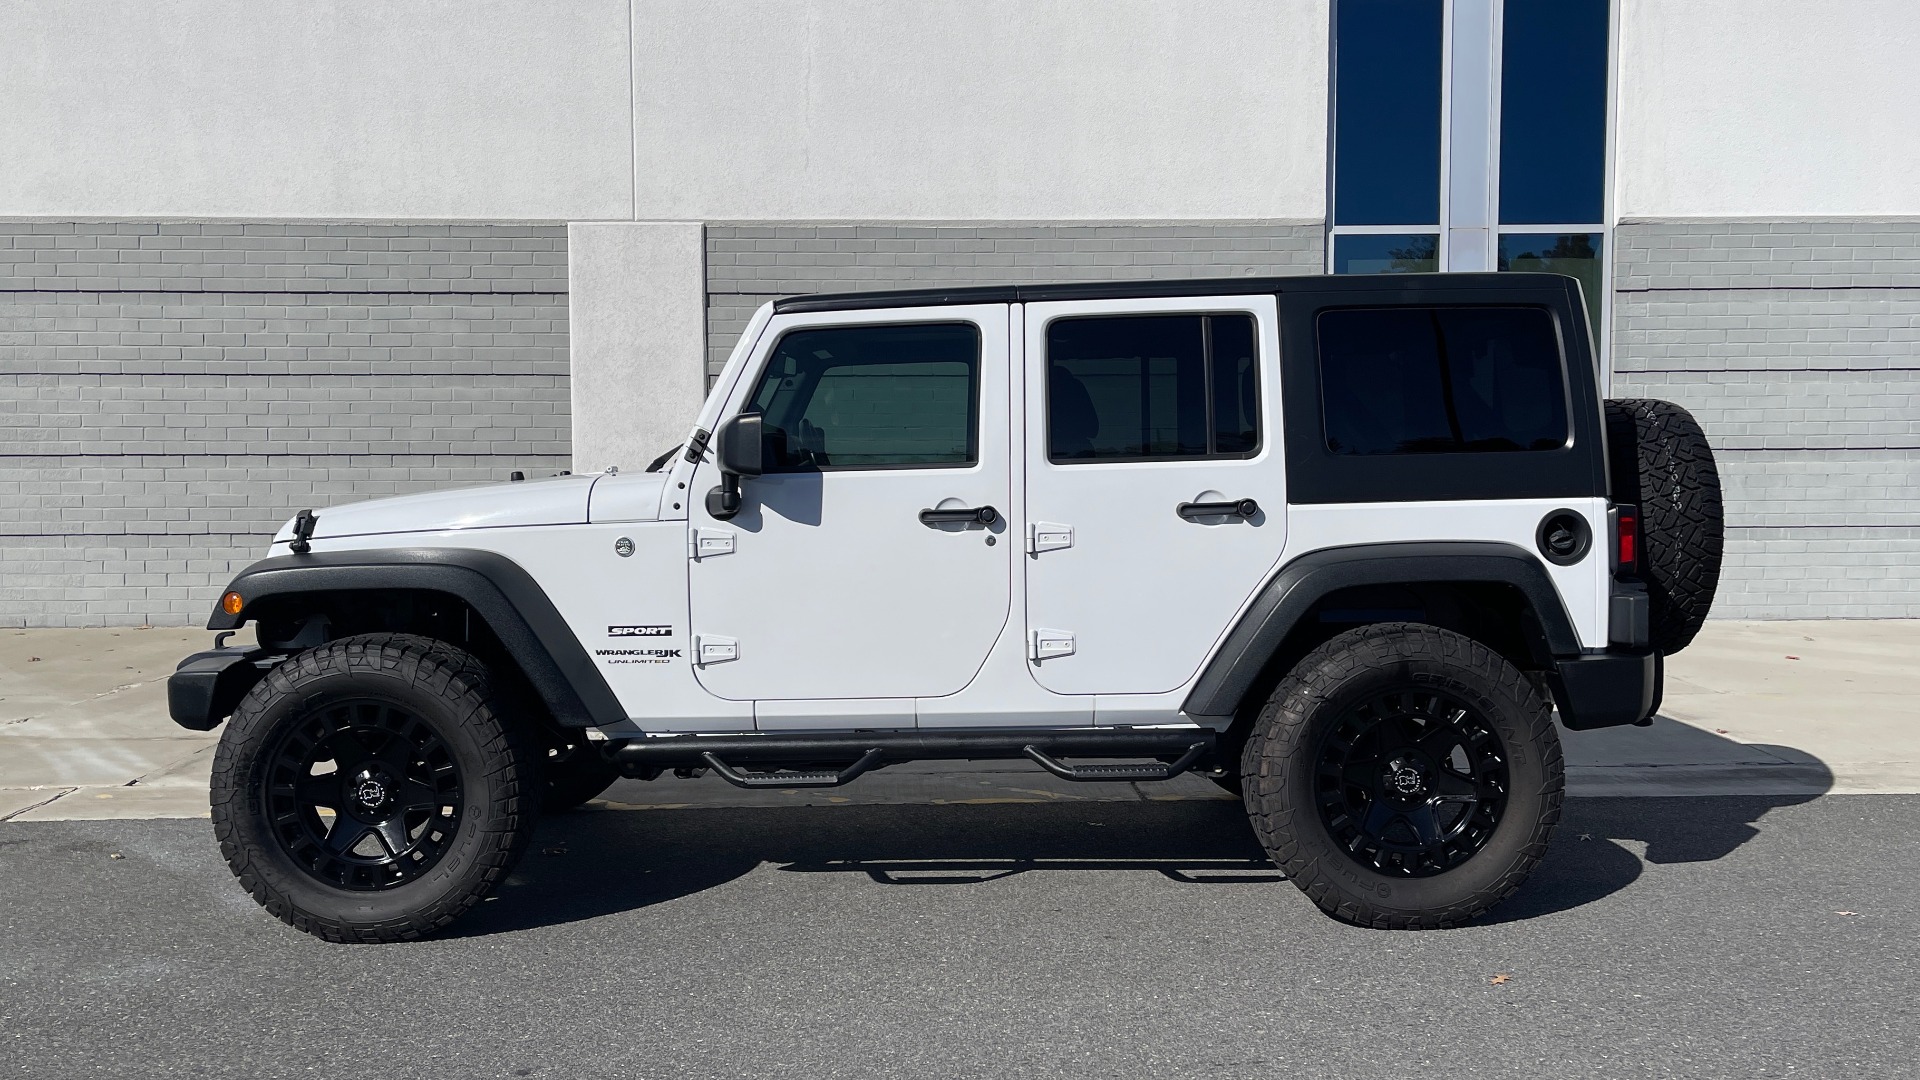 Used 2018 Jeep WRANGLER JK UNLIMITED SPORT S 4X4 / 3.6L V6 / AUTO / HARD-TOP / 20IN WHEELS for sale Sold at Formula Imports in Charlotte NC 28227 3